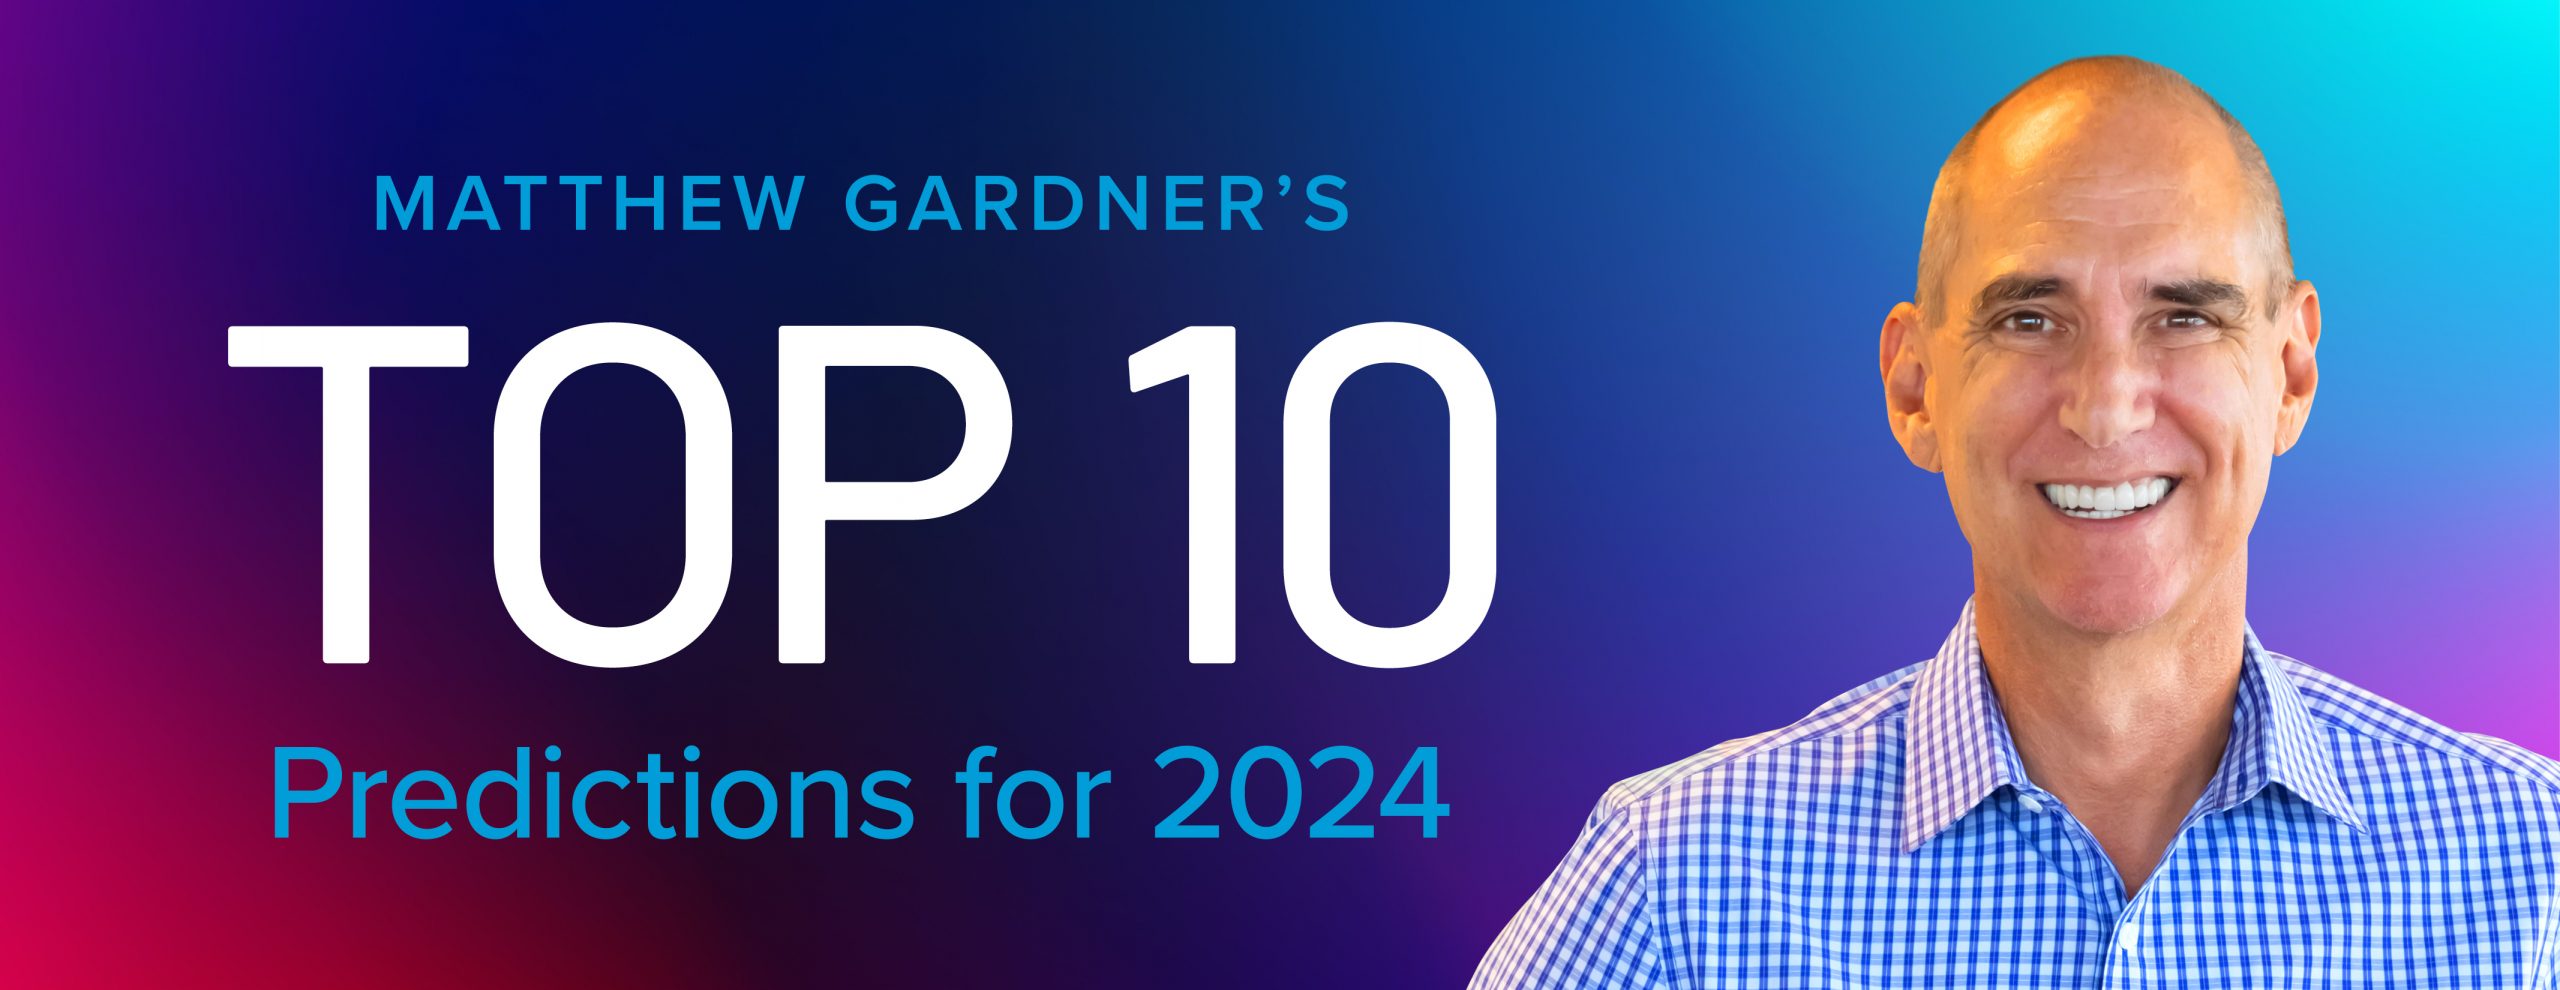 Gradient background with "Matthew Gardner's Top 10 predictions for 2024" written over it and his headshot on the left.